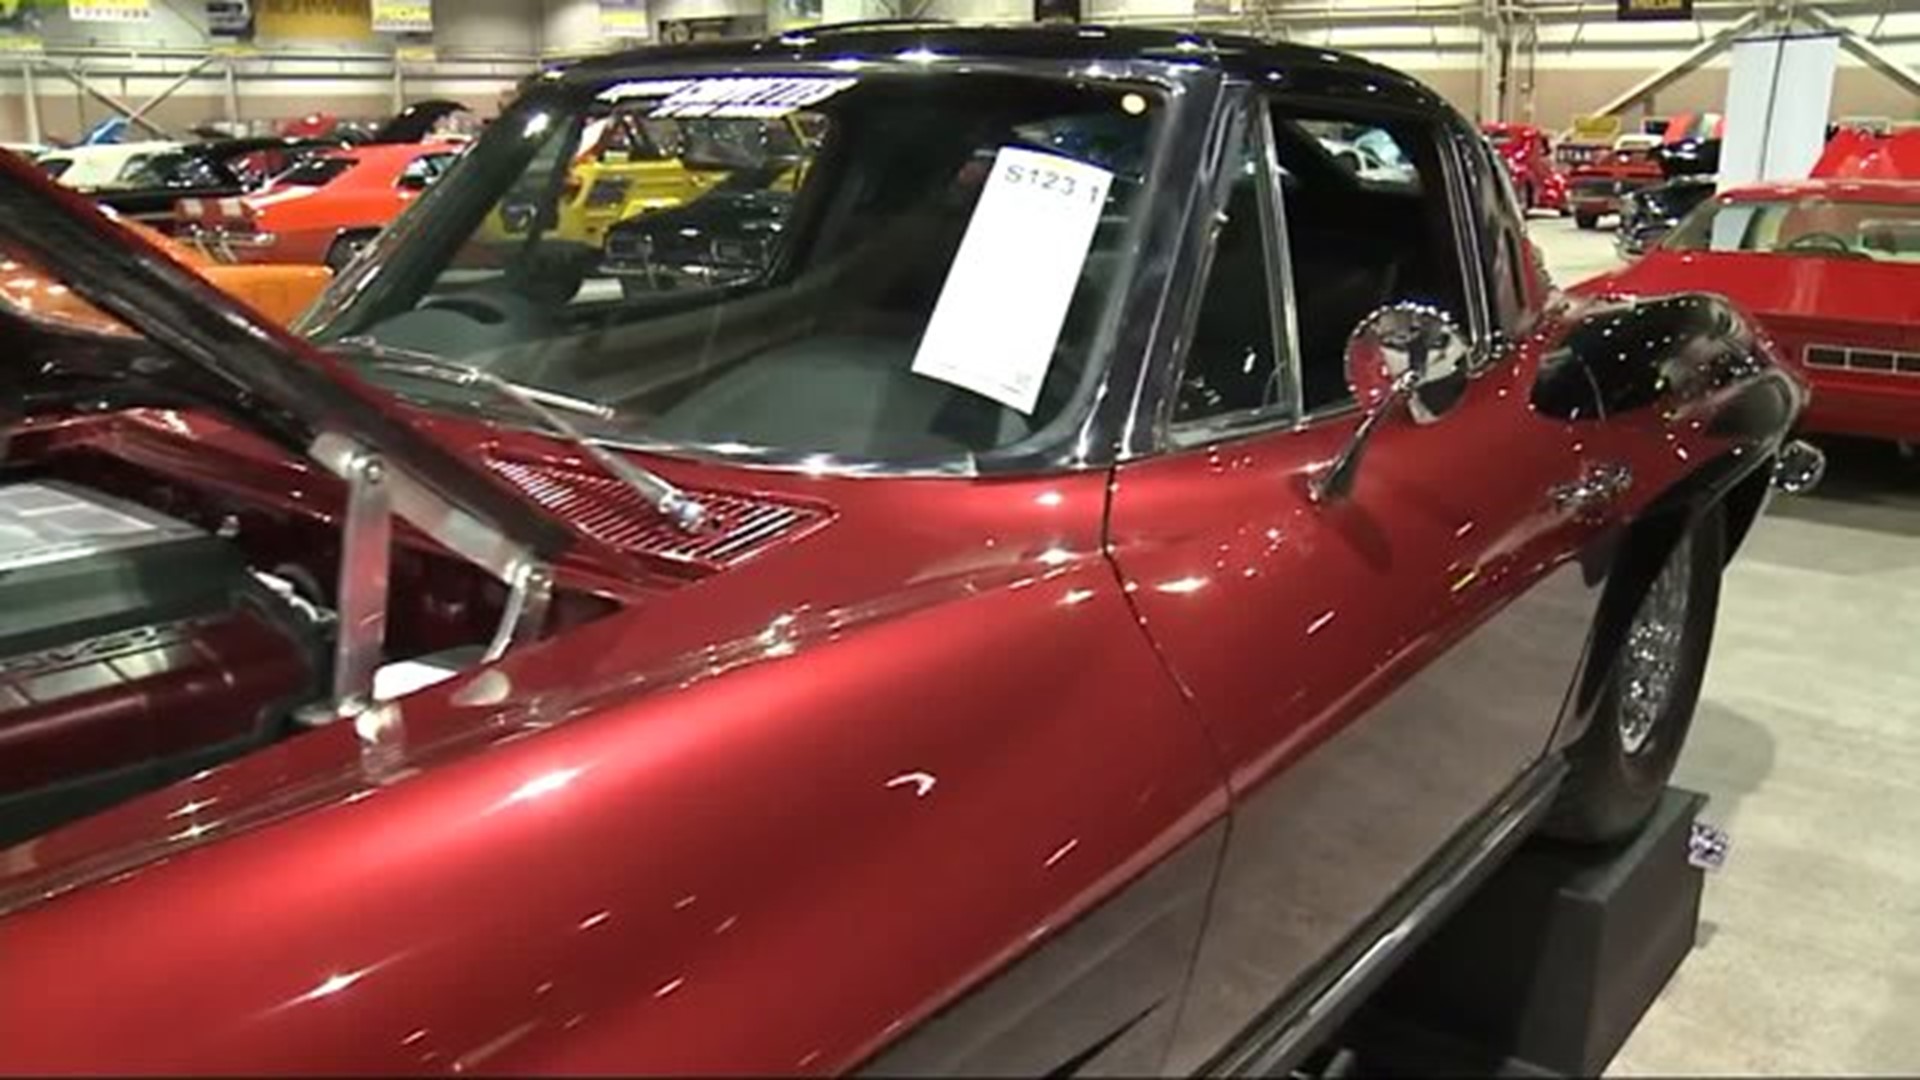 The Mecum Auctions Show brings hundreds of vintage cars and other vehicles to Central Pennsylvania